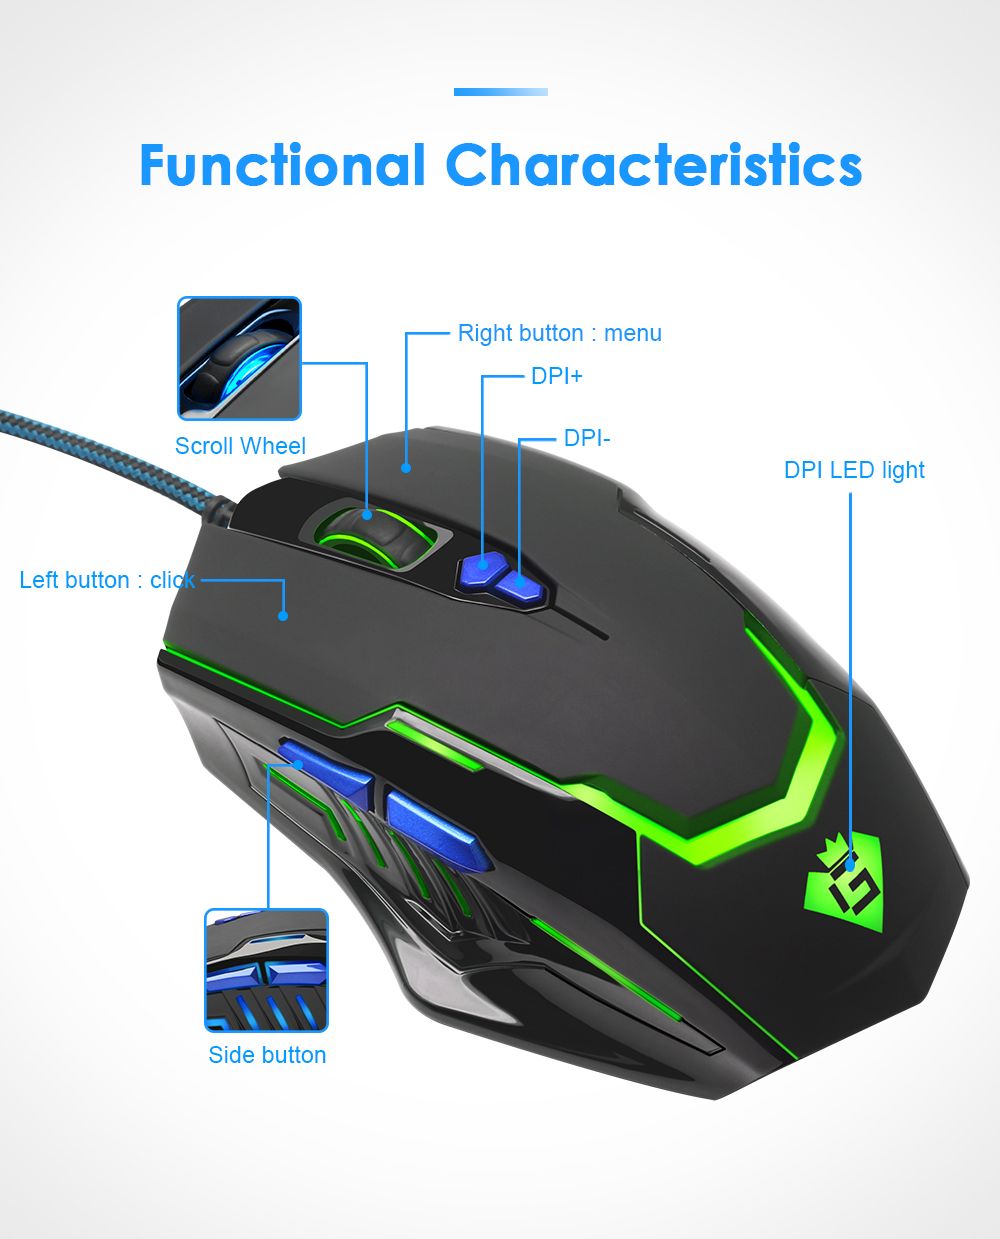 Rocketek-GM02-3200-DPI-7-buttons-Led-Backlight-USB-wired-Gaming-optical-Mouse-for-Game-Laptop-Comput-1658963